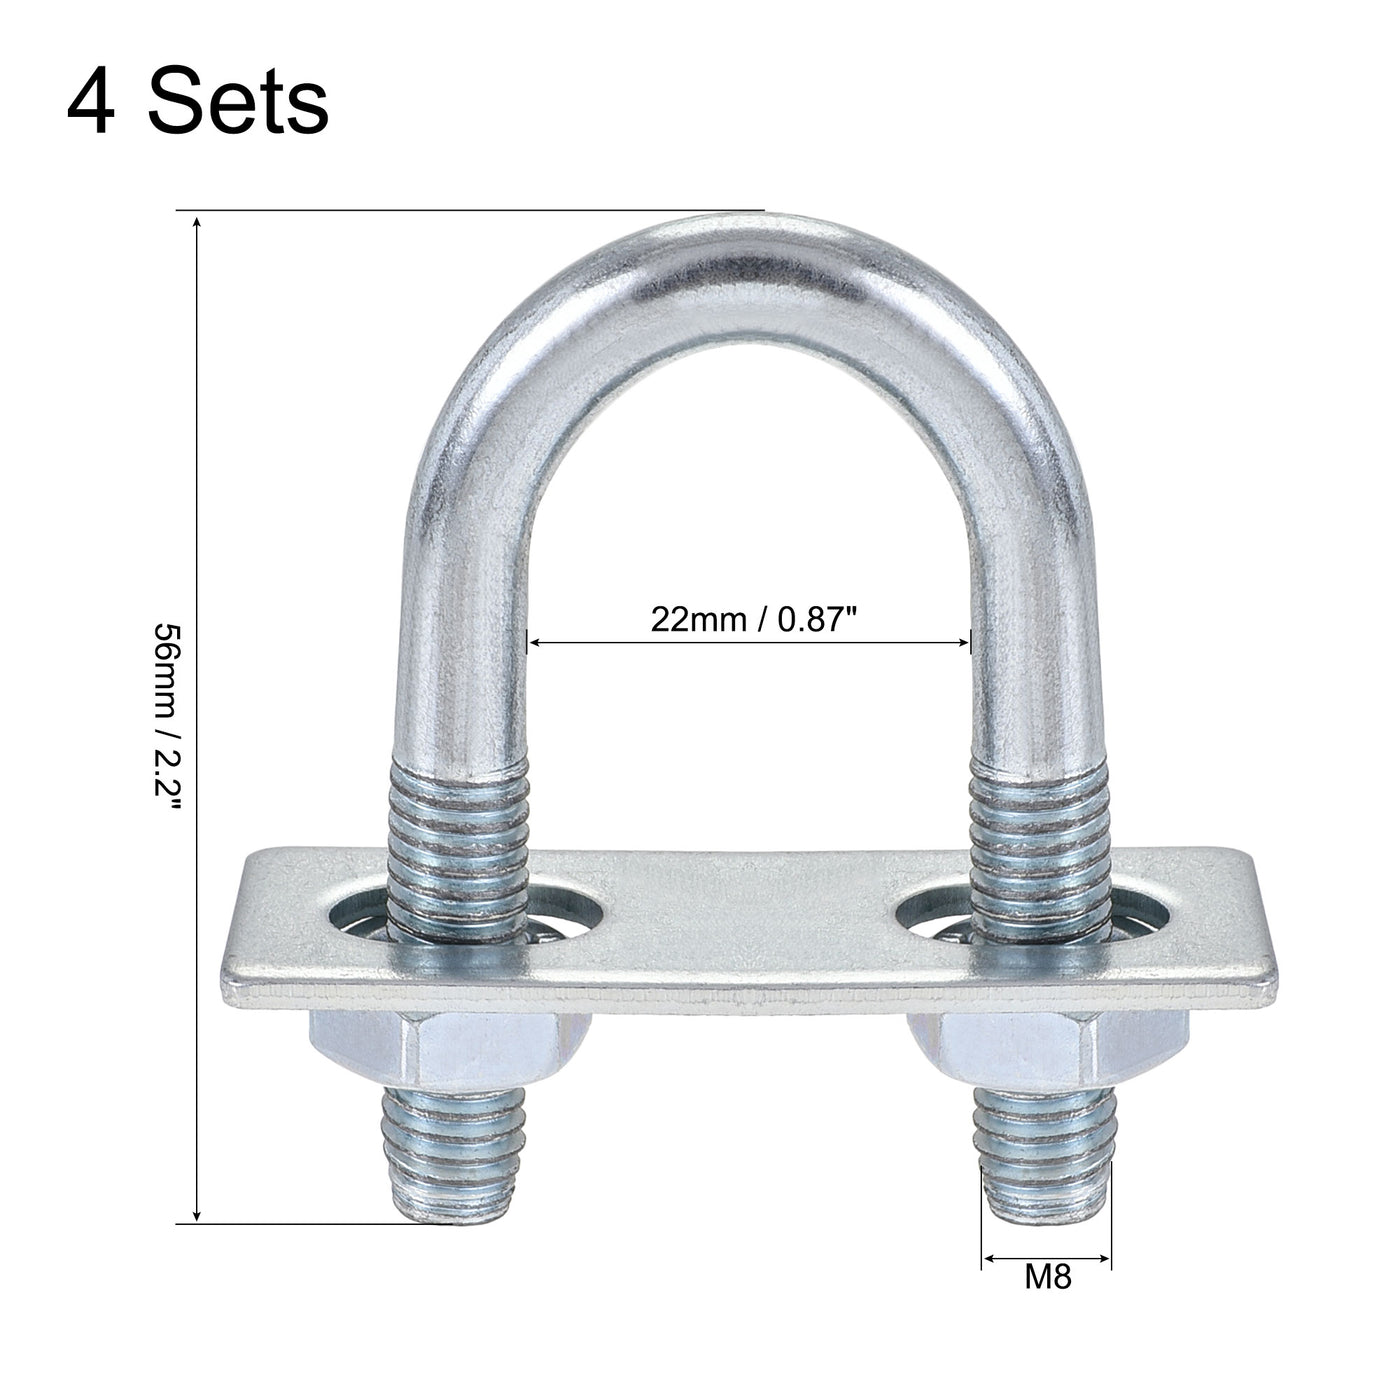 Uxcell Uxcell Round U-Bolt 22mm Inner Width 56mm Length Steel M8 with Nut Plate 4 Sets